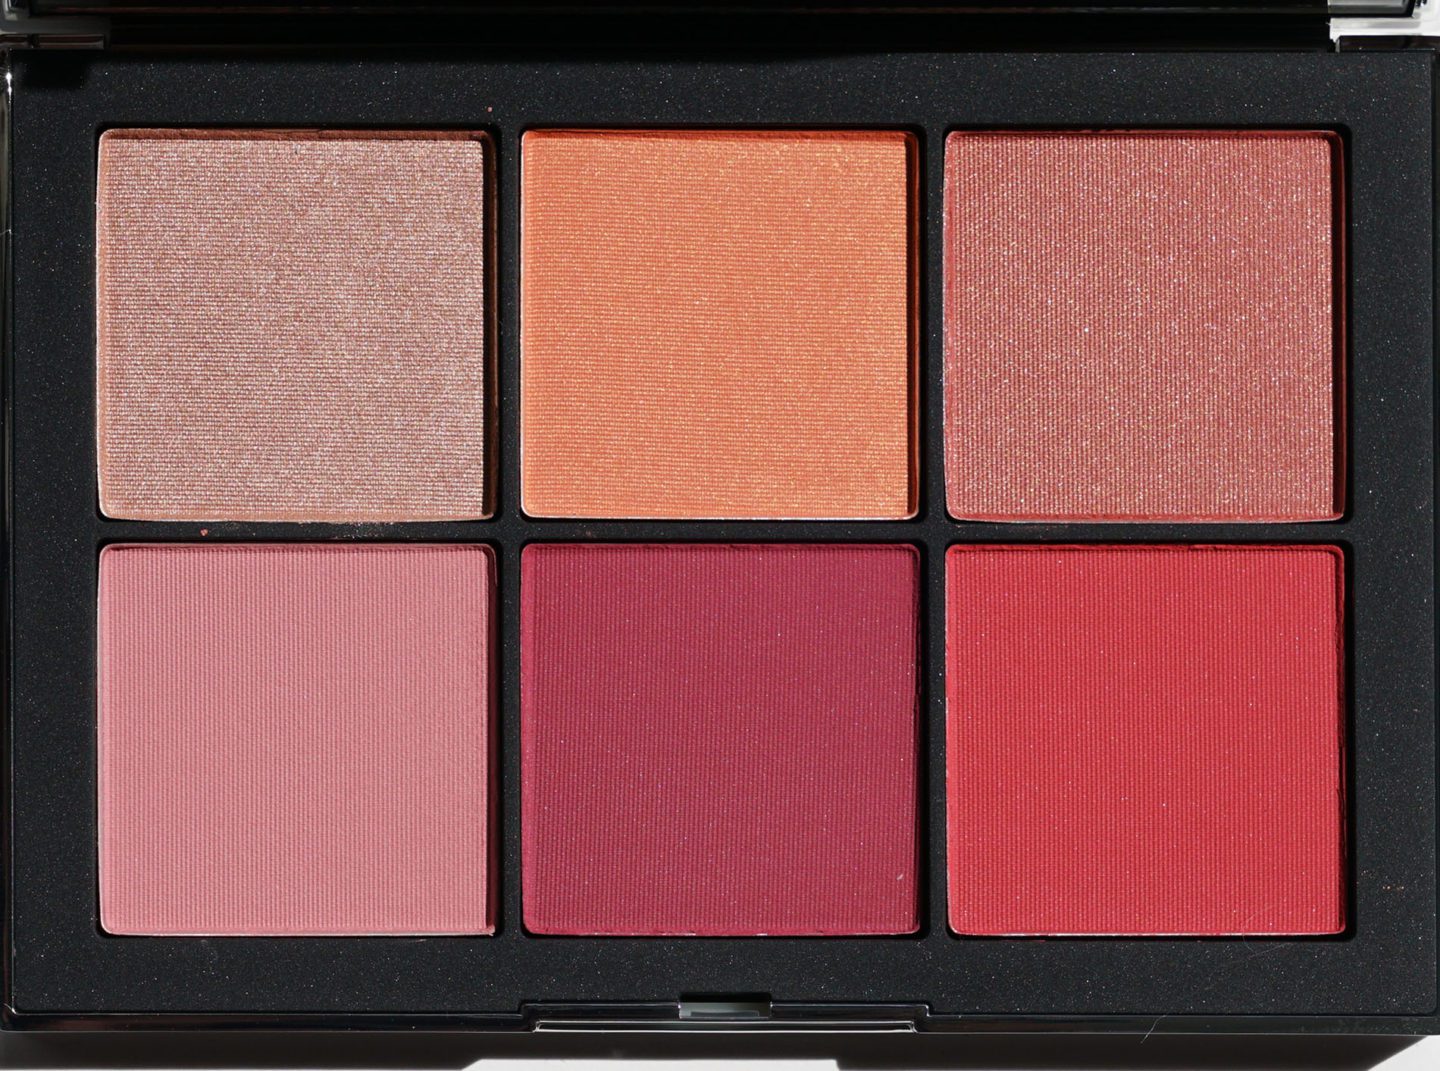 NARS NARSissist Wanted Cheek Palette Volume 2 review and swatches 